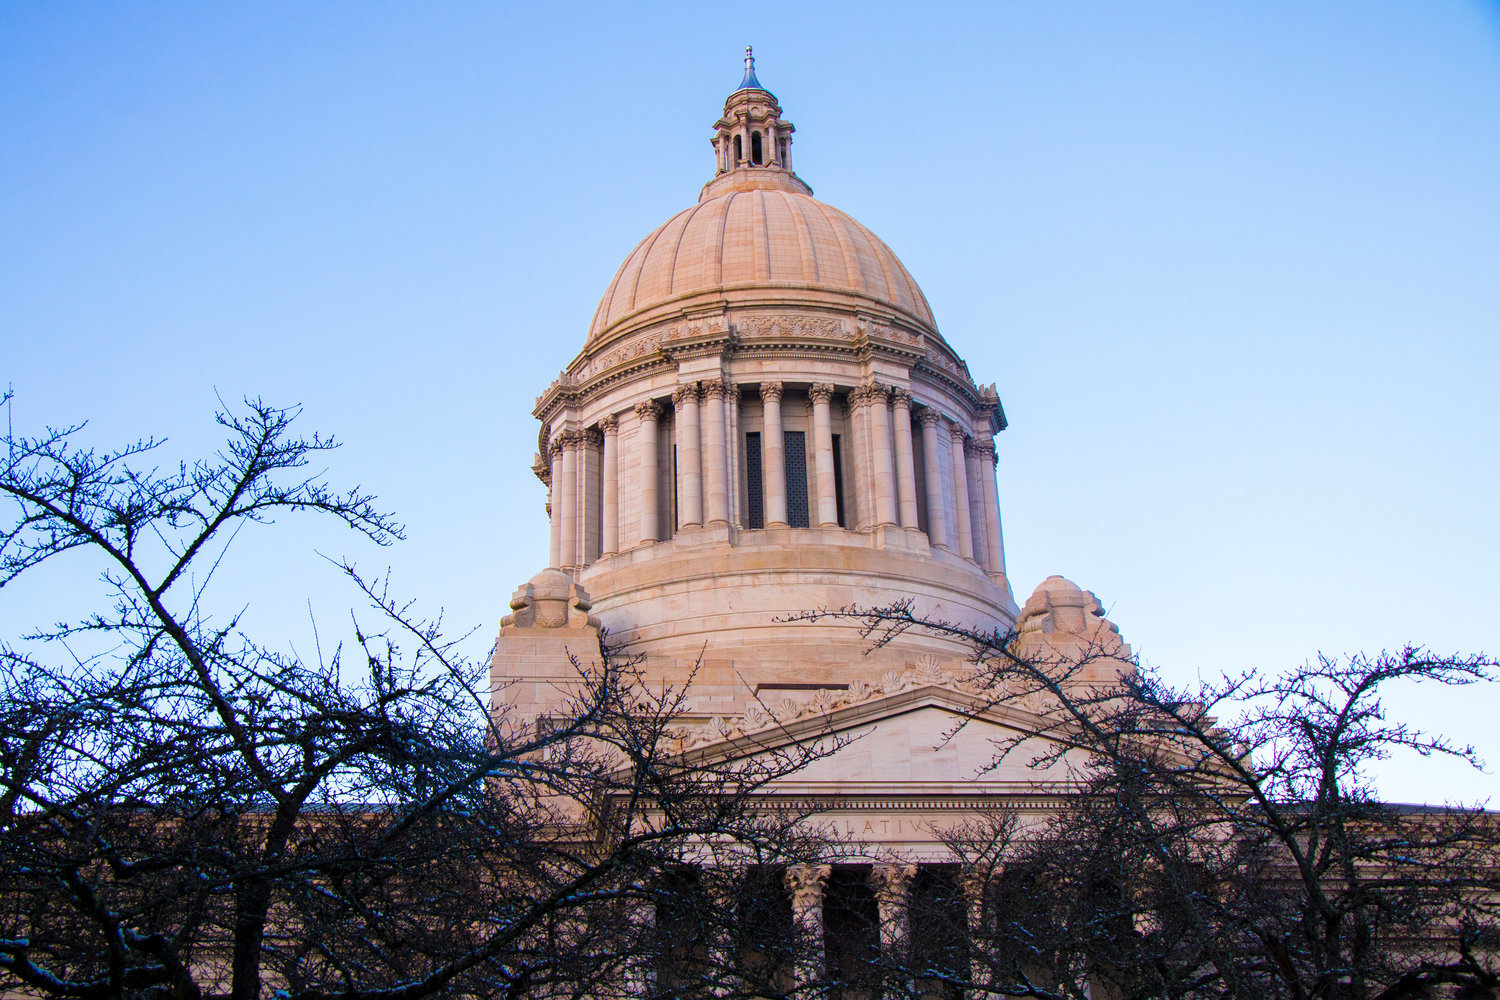 The Washington State Capitol Building is pictured.